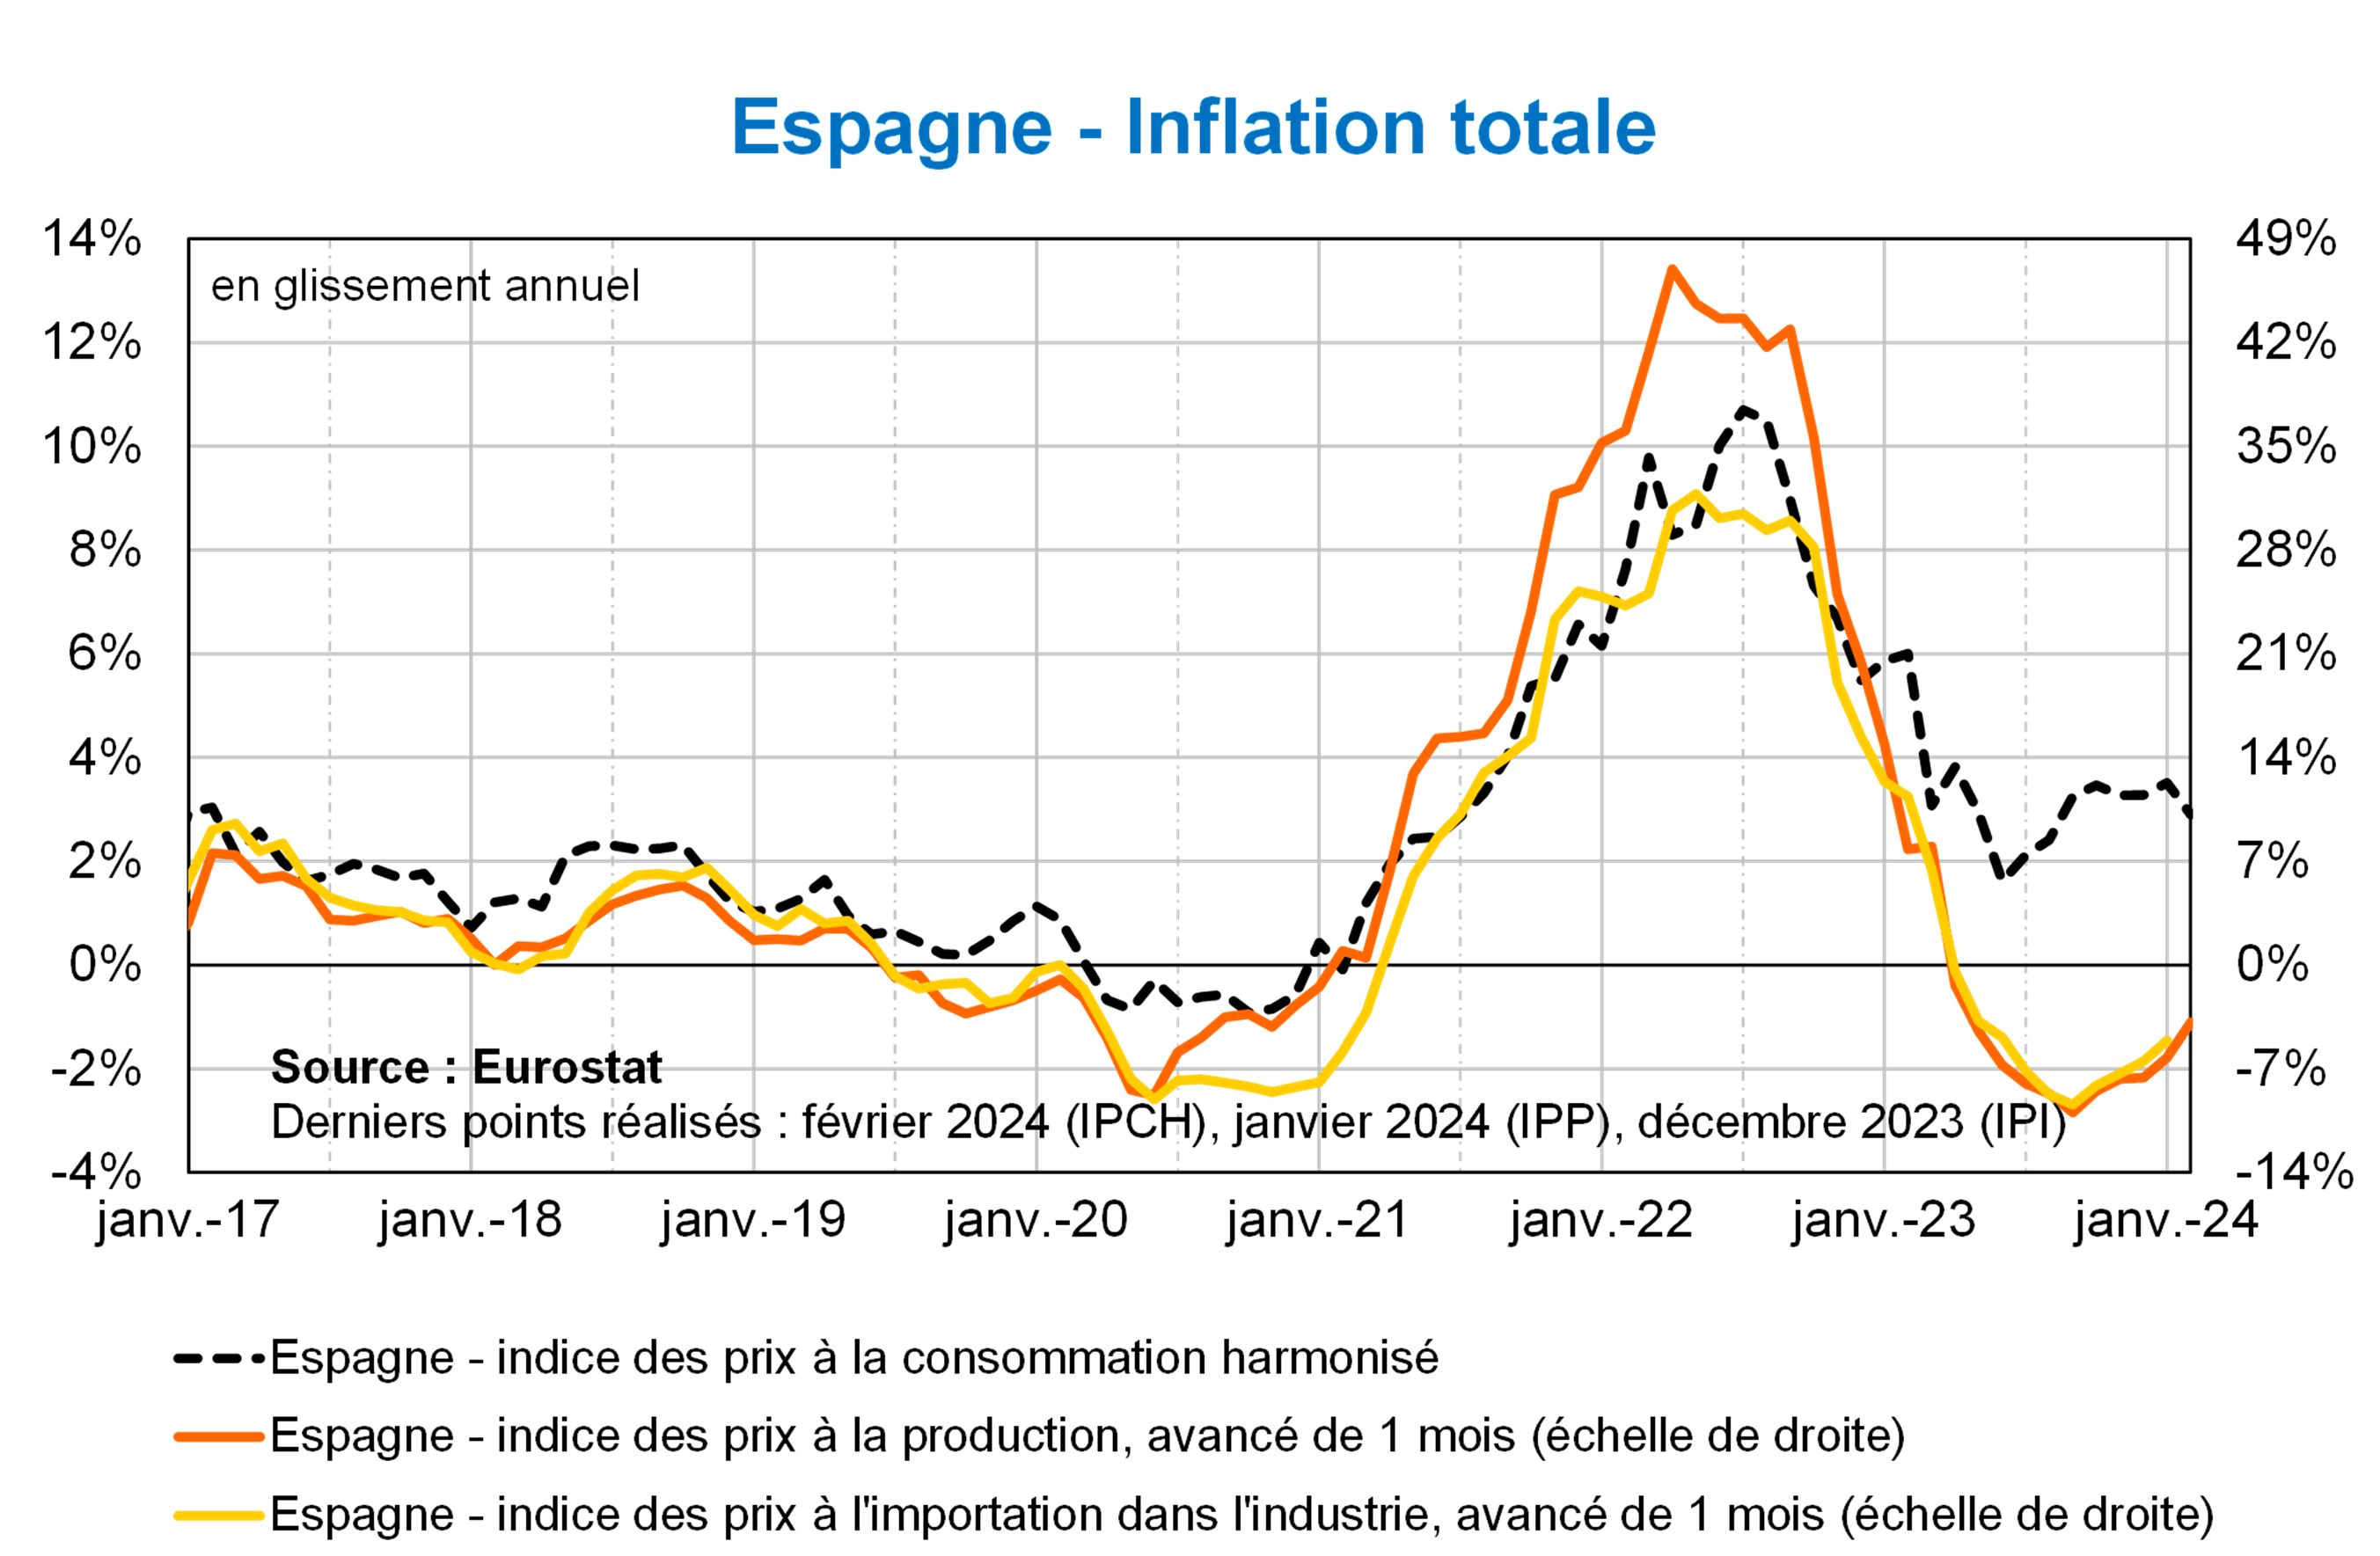 Espagne Inflation totale